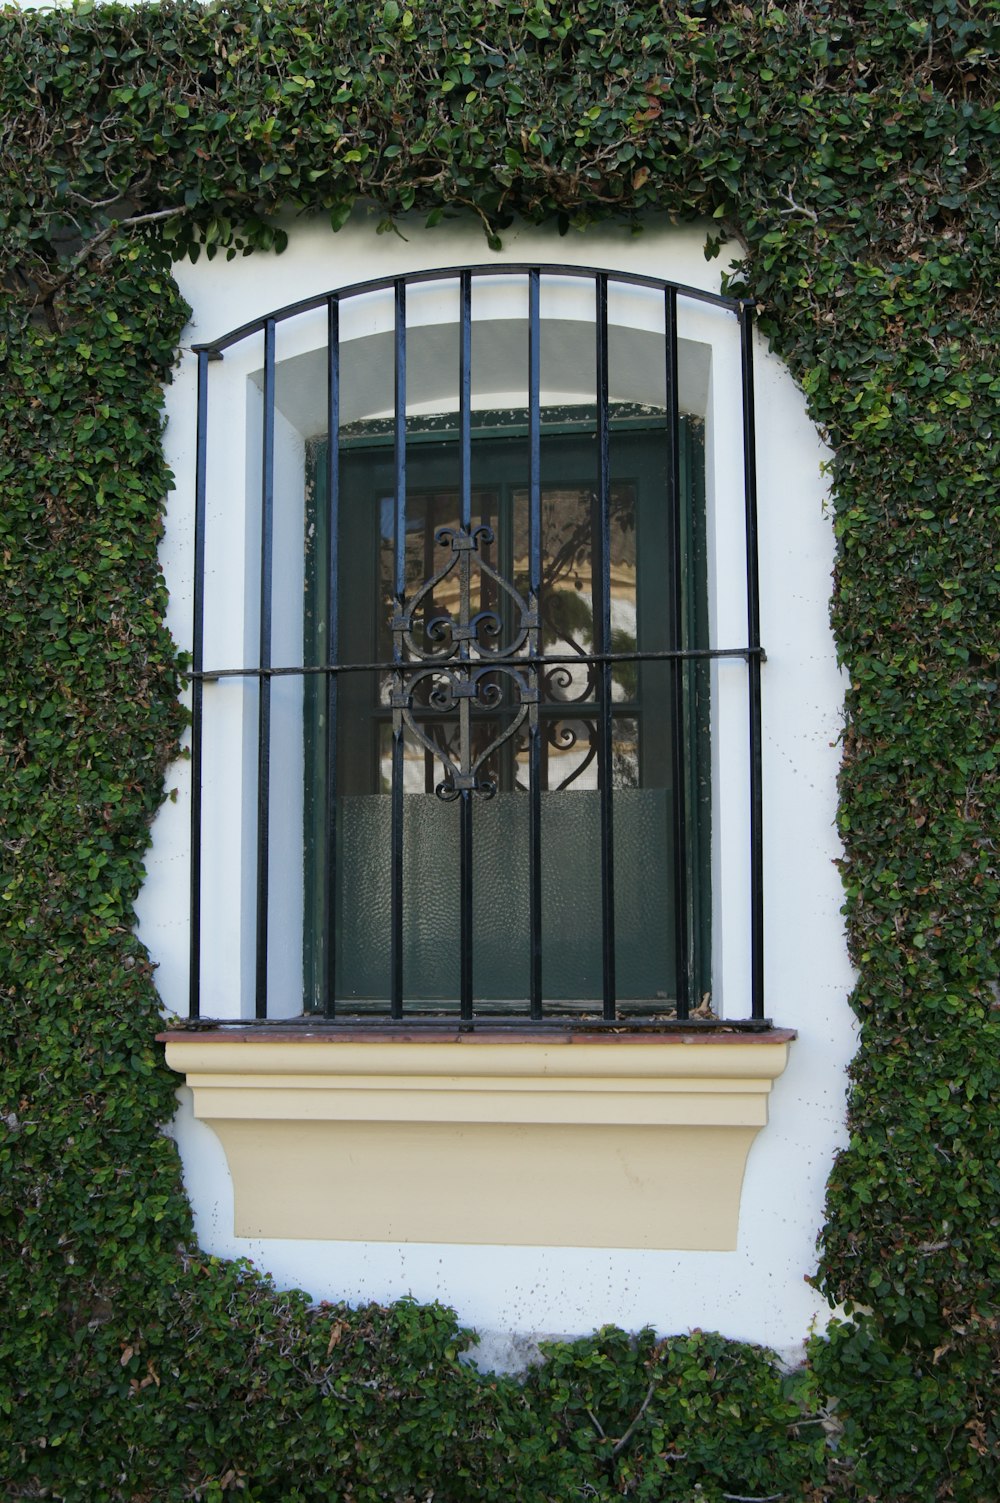 a window with bars and a dog in the window